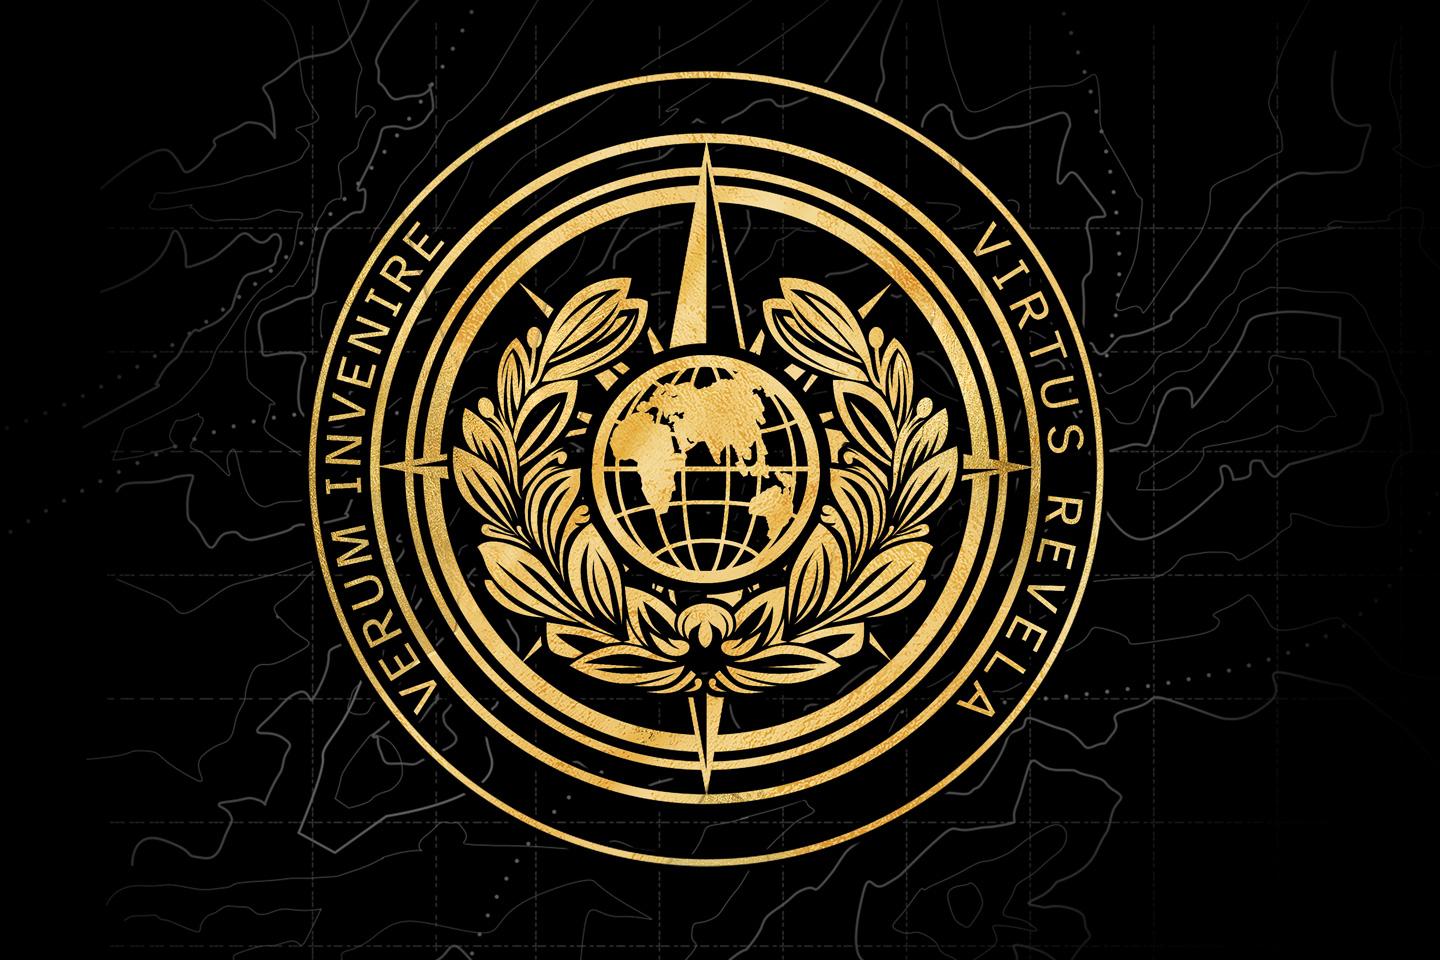 An image of the Society of Raiders crest.